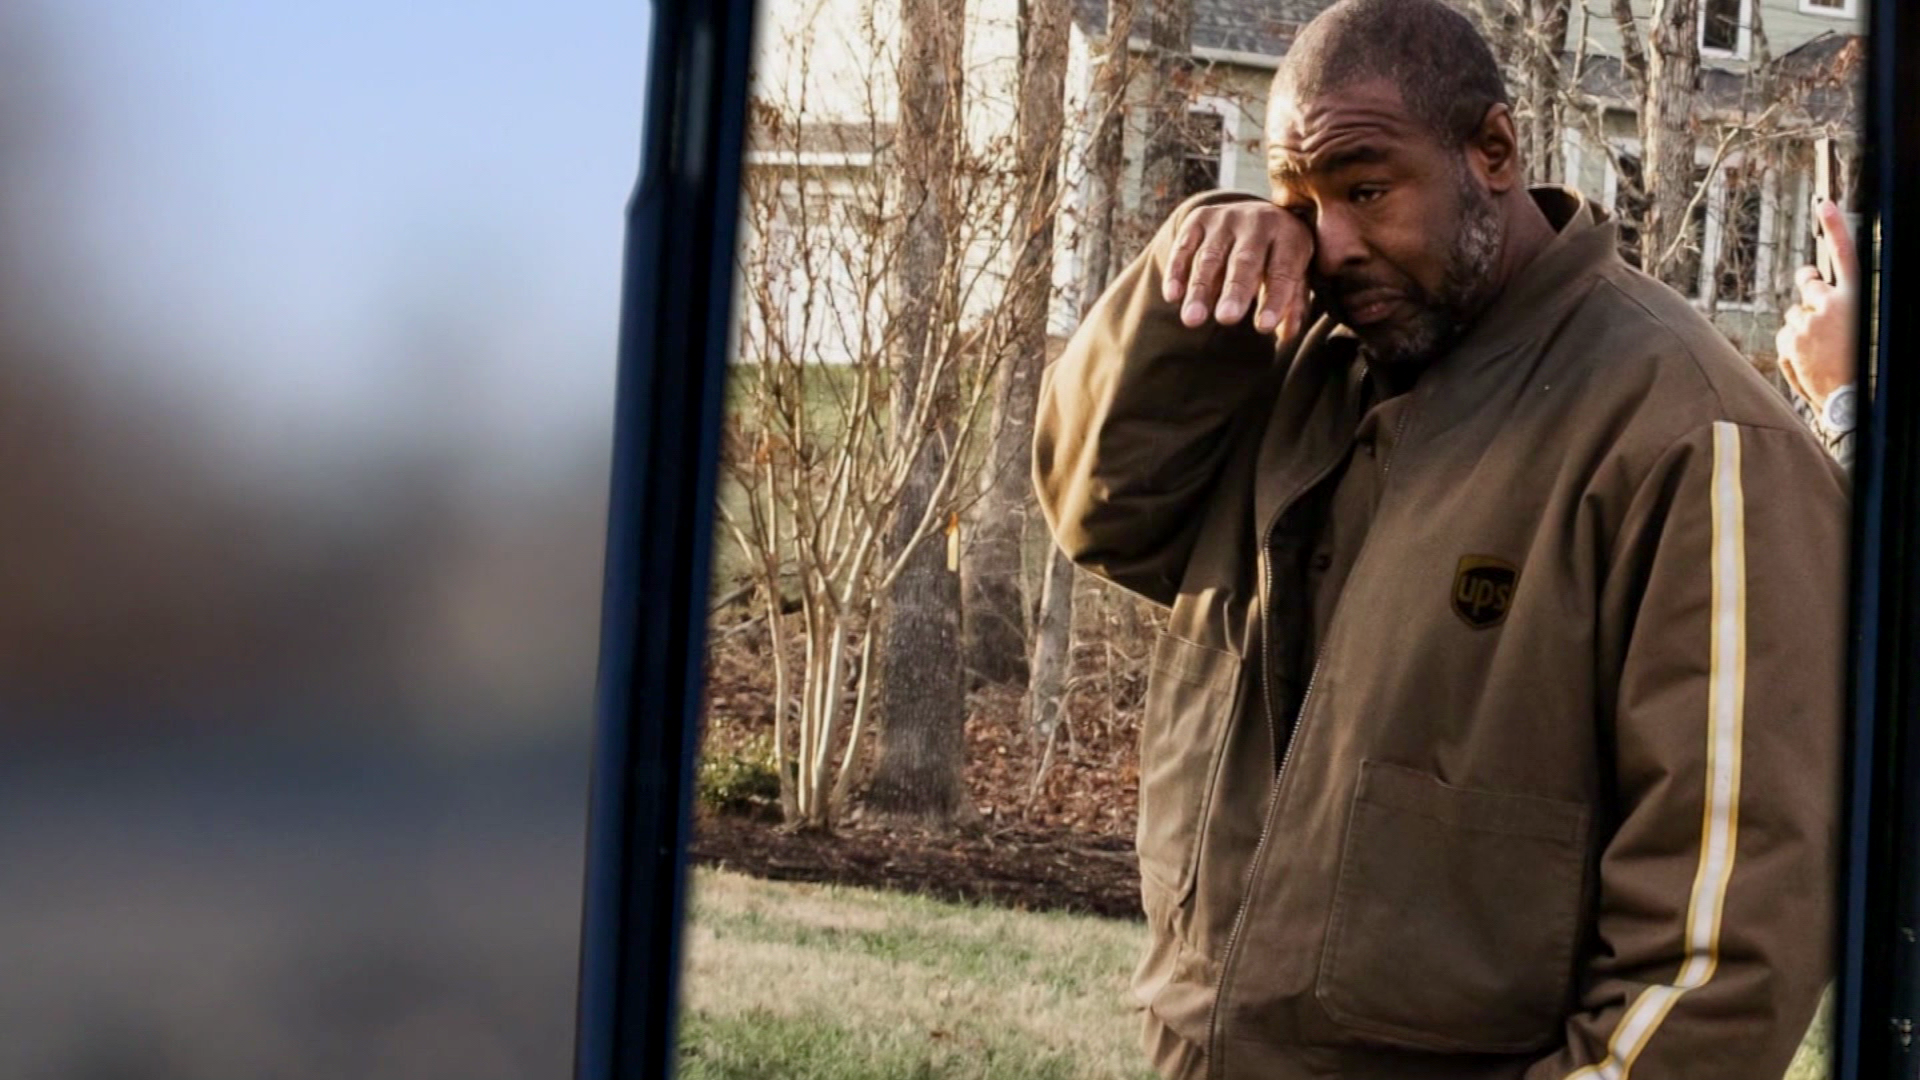 Virginia neighbors surprise UPS driver with emotional 'thank you